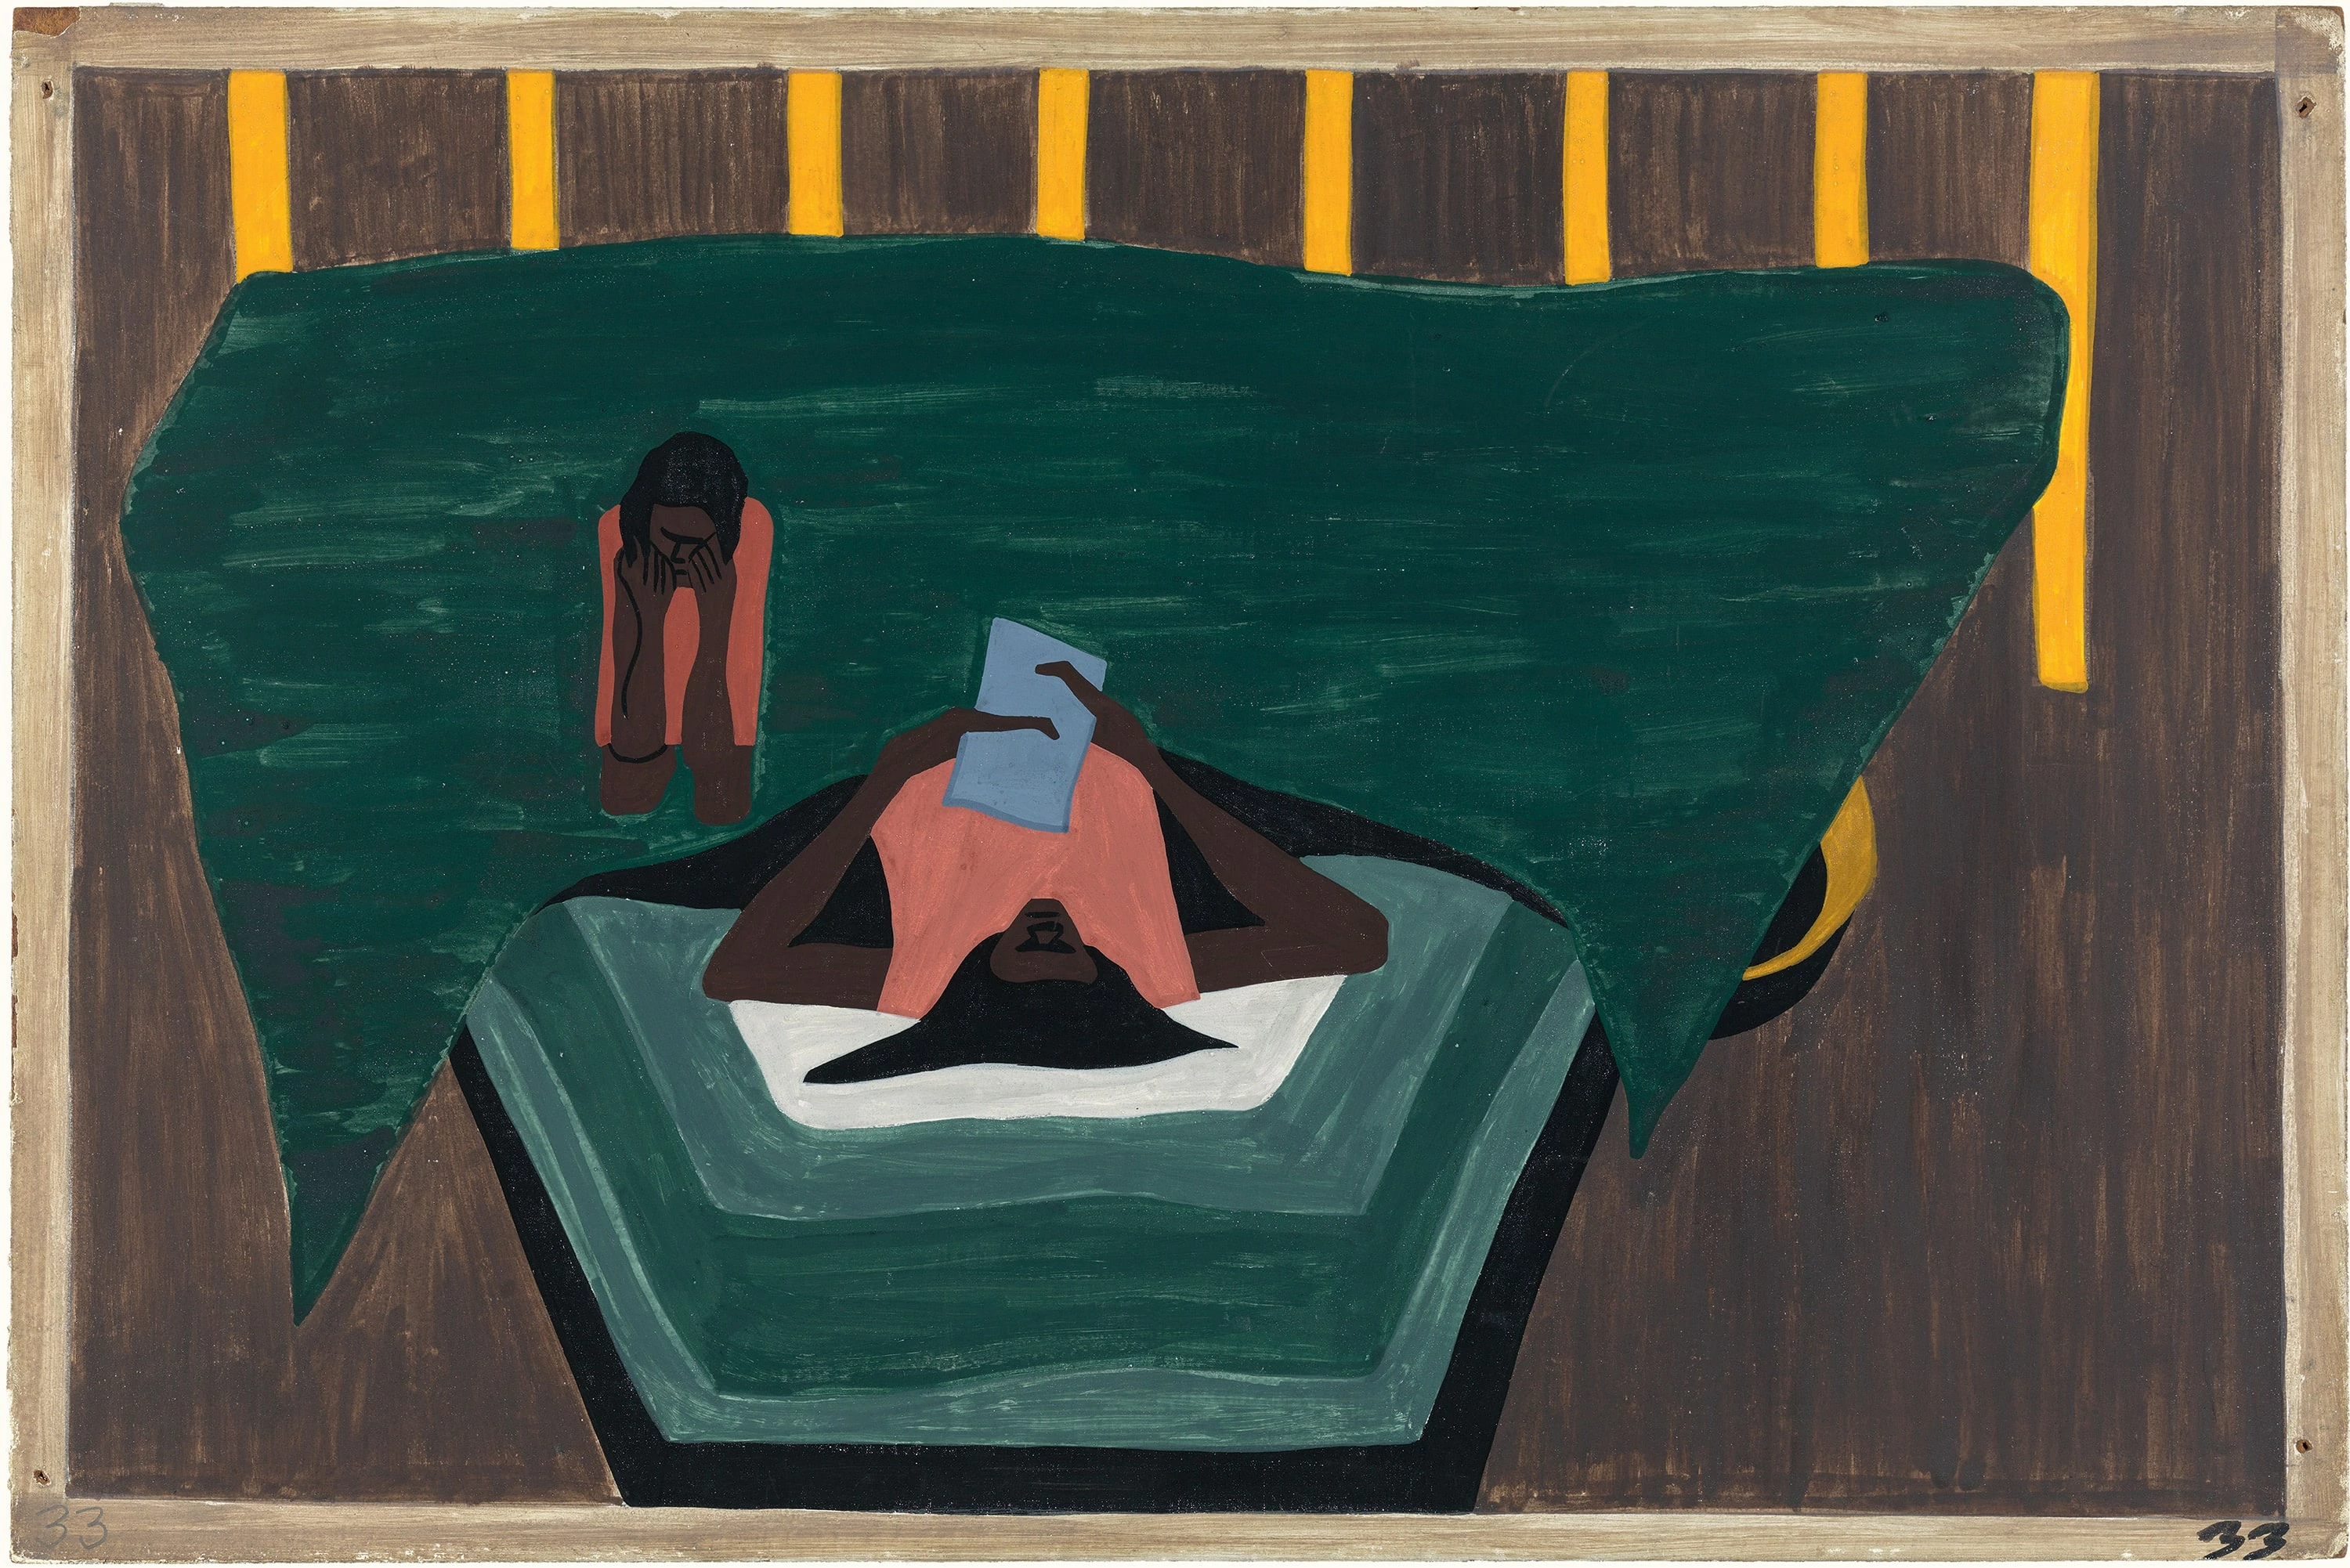 Migration Series No.33: Letters from relatives in the North told of the better life there, Jacob Lawrence